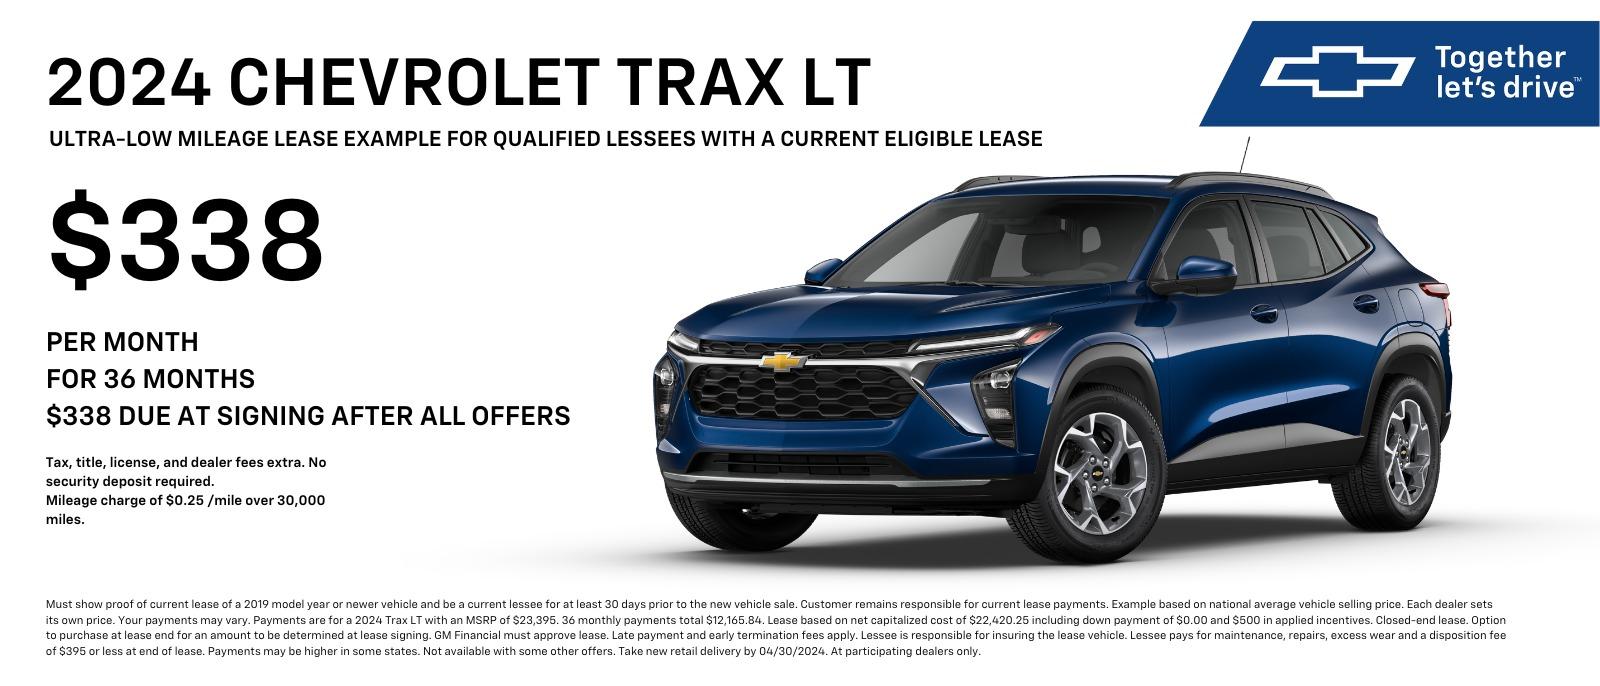 2024 CHEVROLET TRAX LT ULTRA-LOW MILEAGE LEASE EXAMPLE FOR QUALIFIED LESSEES WITH A CURRENT ELIGIBLE LEASE $338 PER MONTH FOR 36 MONTHS $338 DUE AT SIGNING AFTER ALL OFFERS